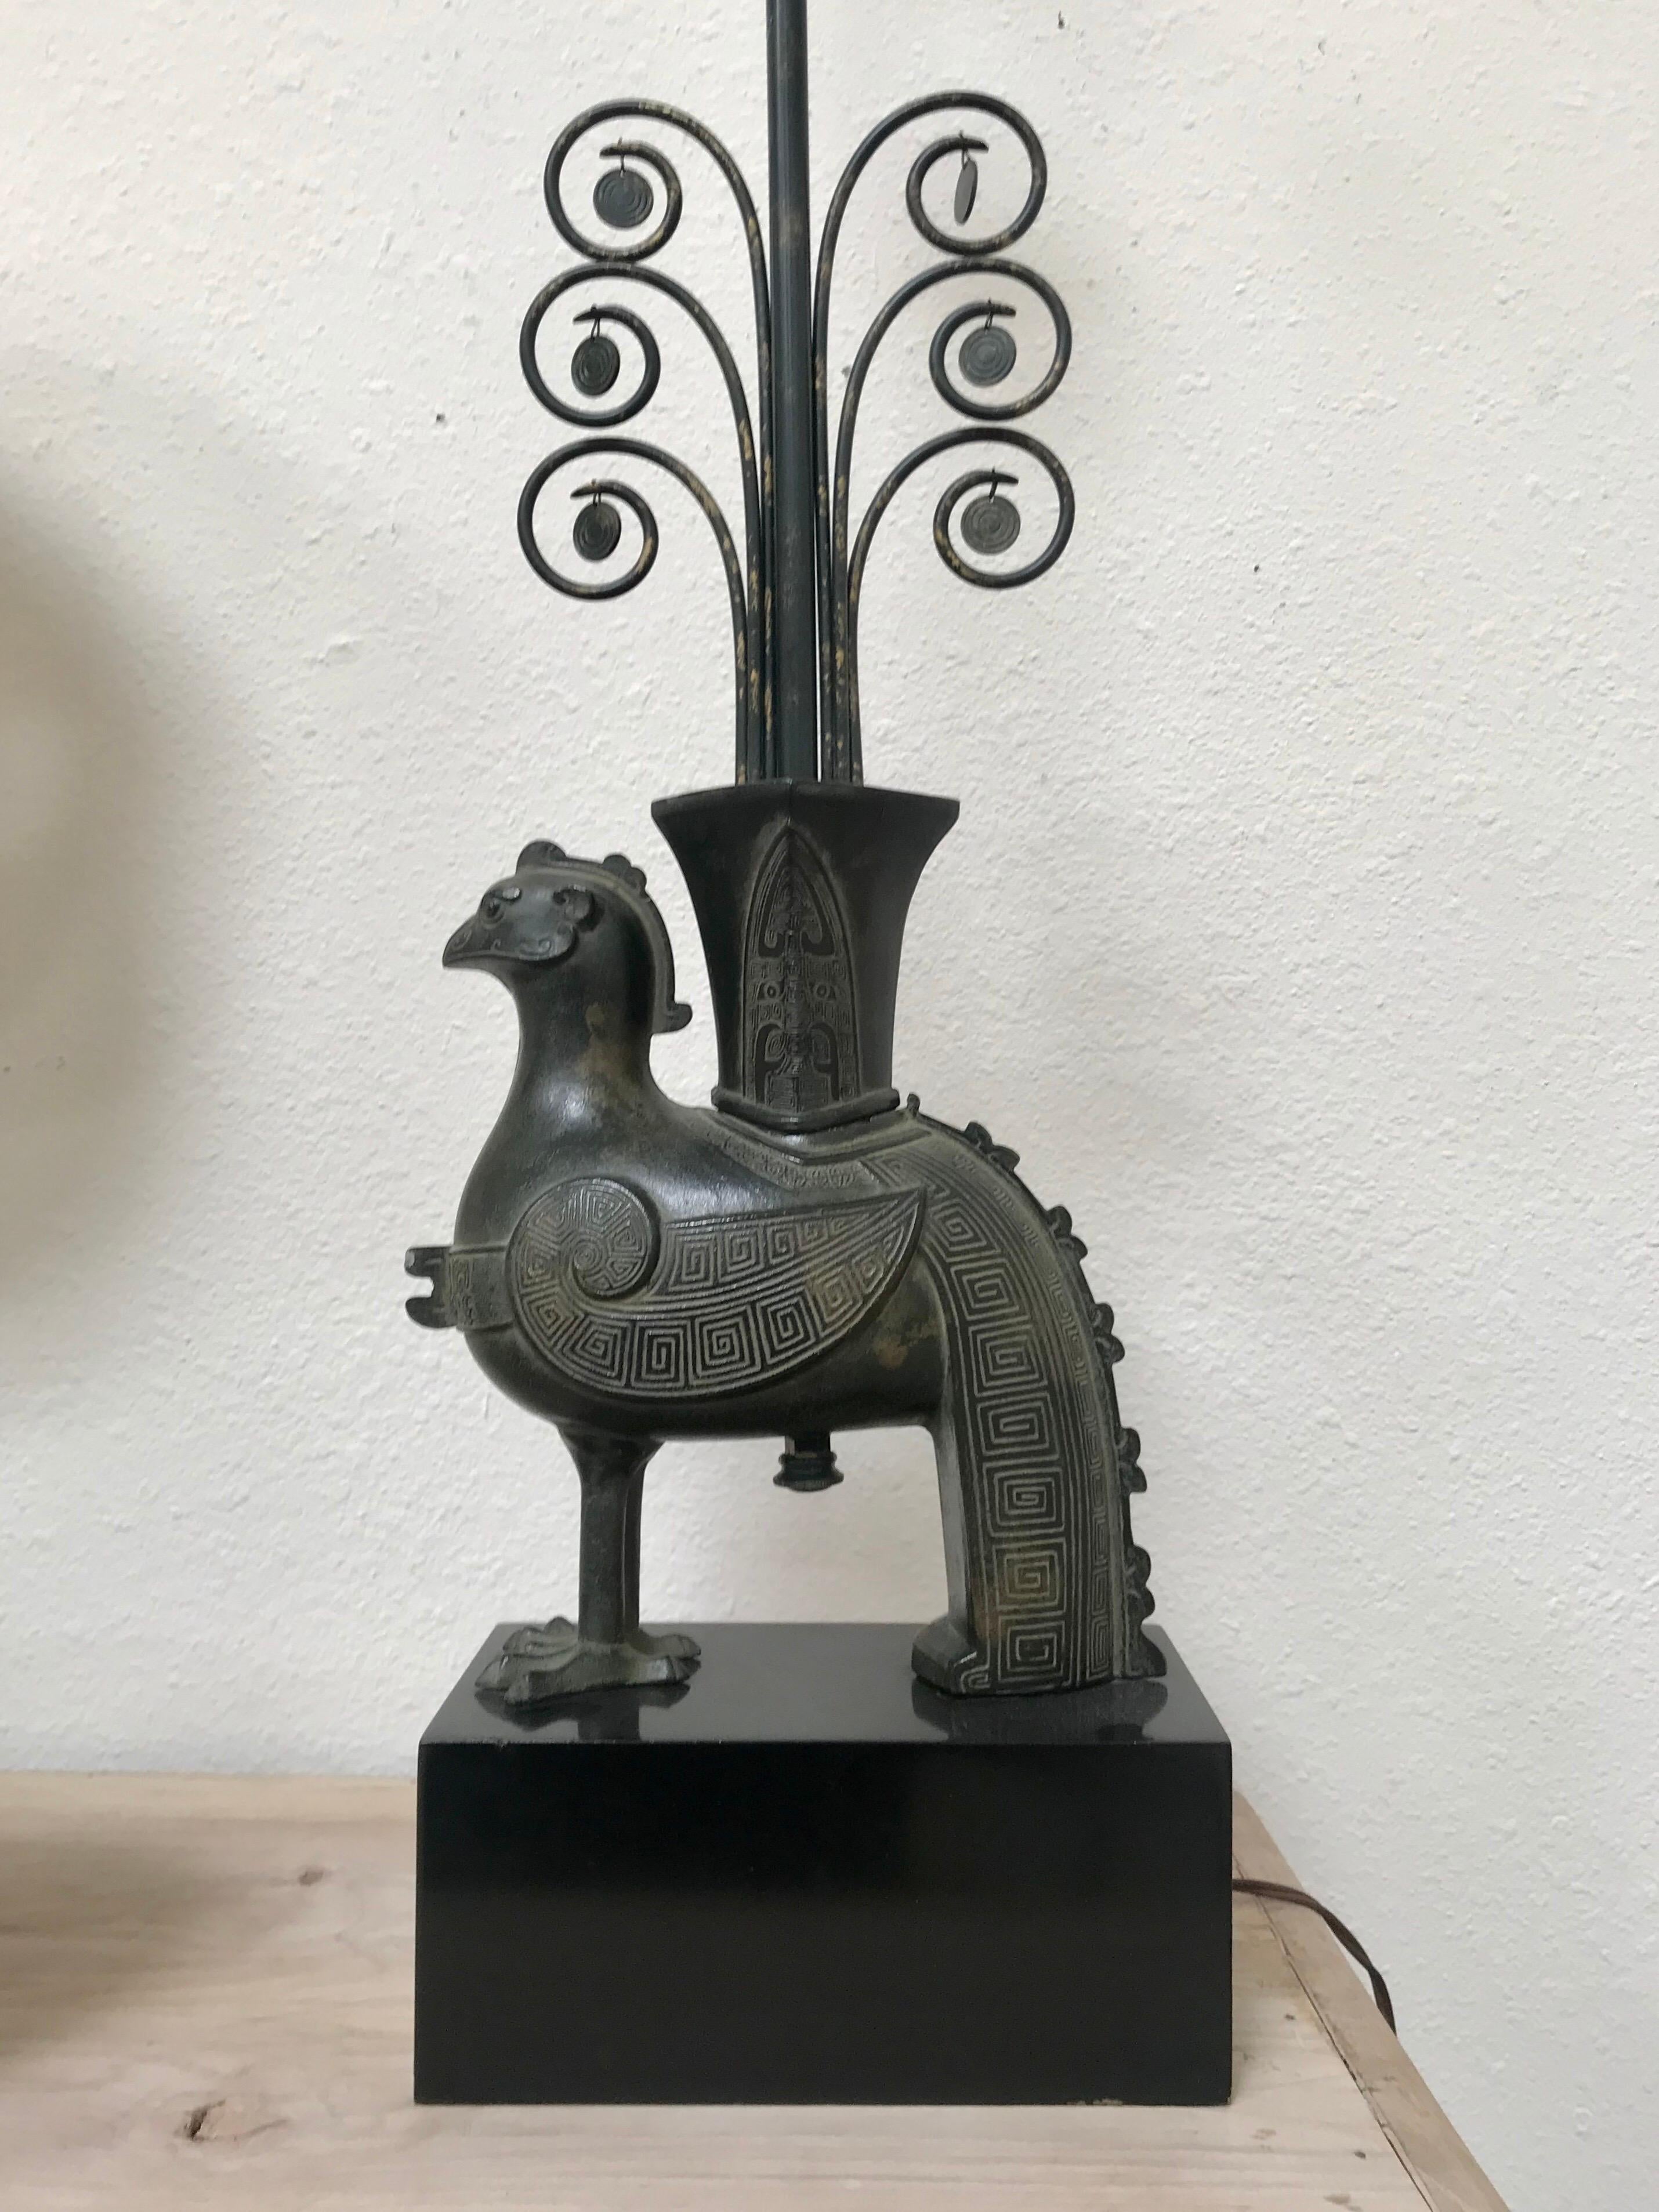 Cast metal with Pompeian bronze
original finial and hardware
black lacquered wood base
works fine
no shade
great for any interior 
 